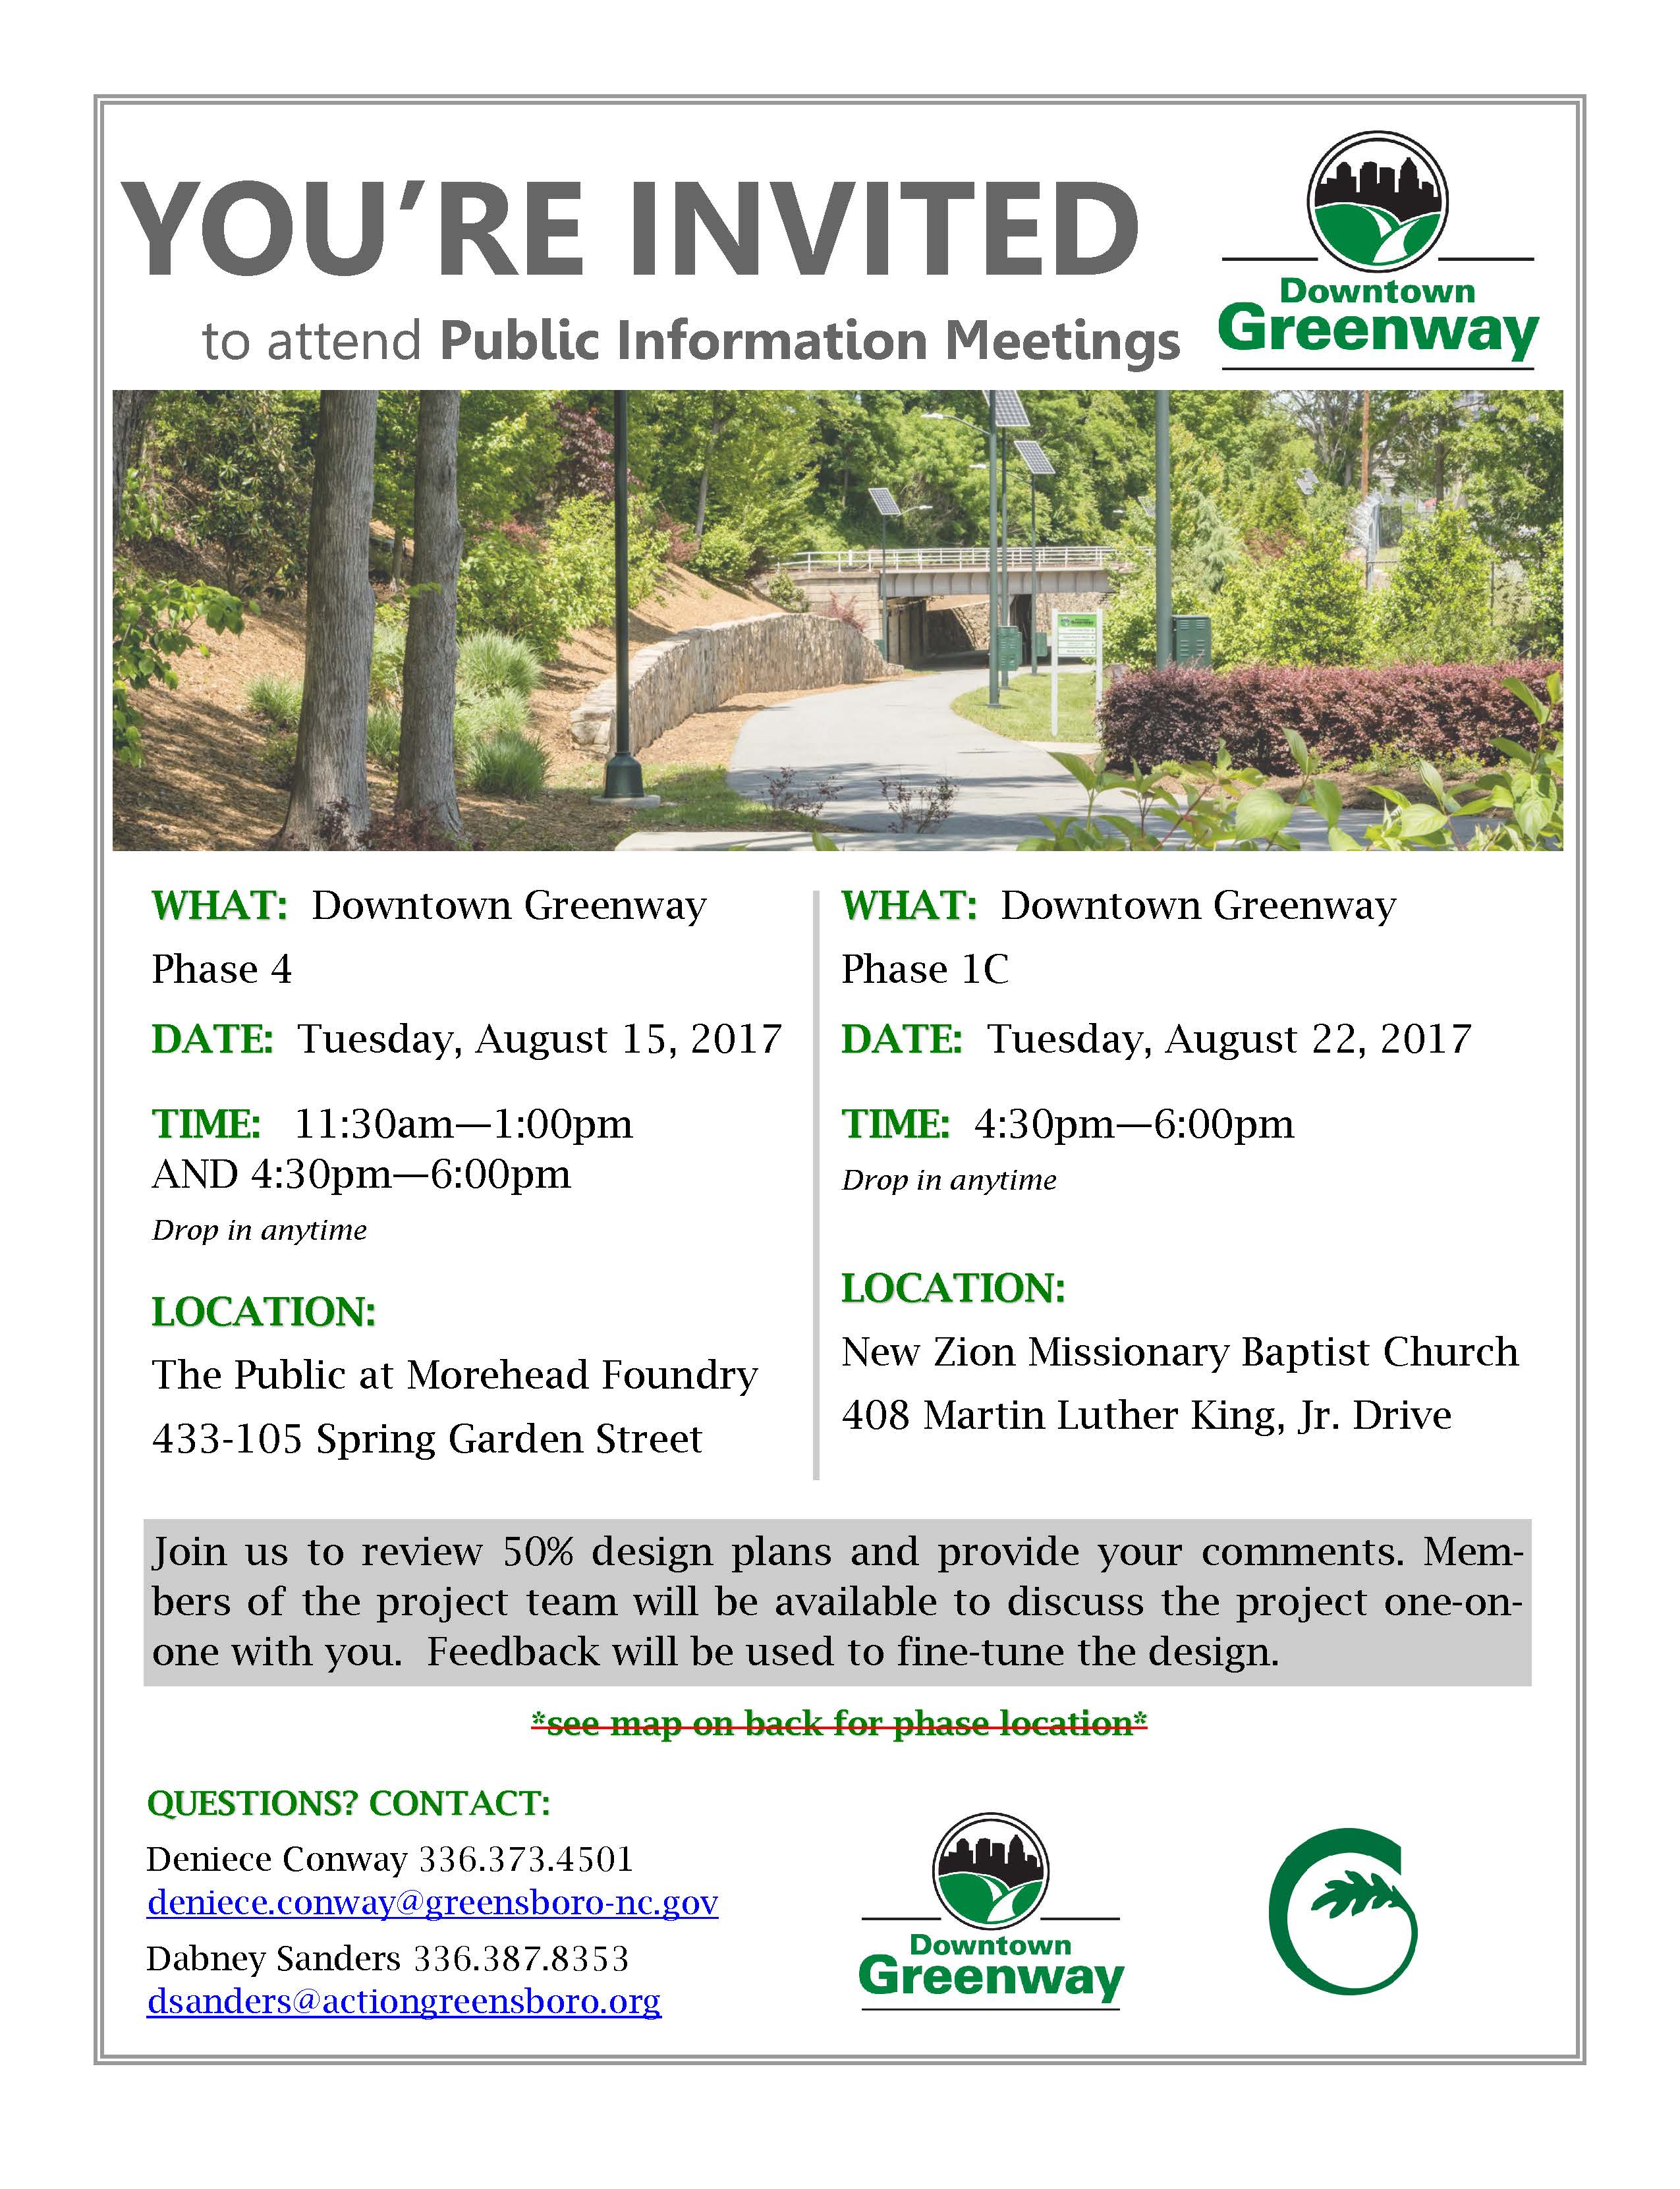 Flyer for Downtown Greenway August 15 public session on design of new section